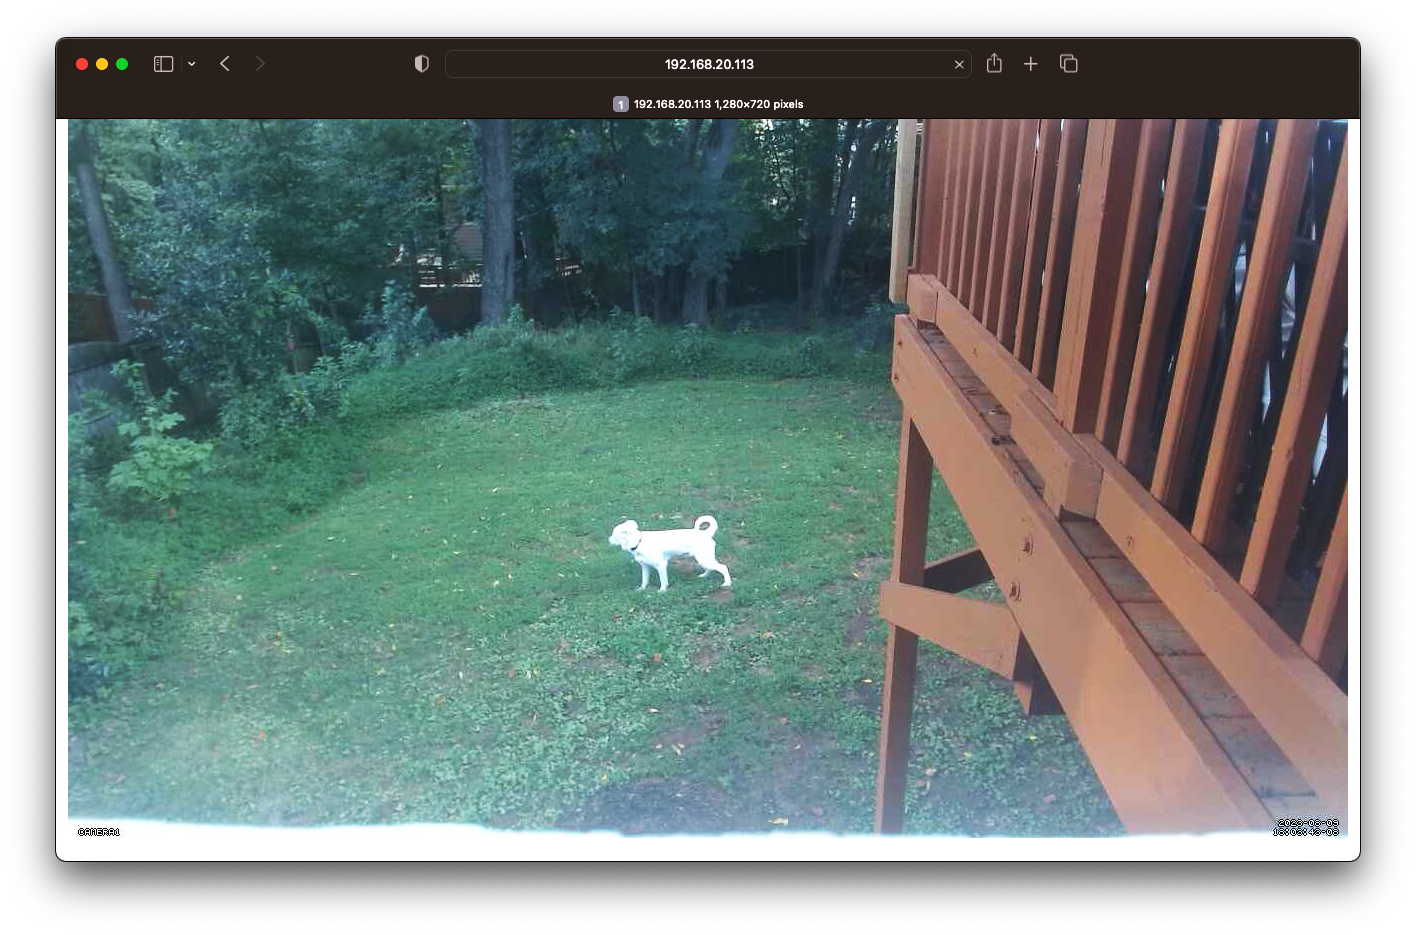 Still of Backyard from the RPi/USB Security Cam